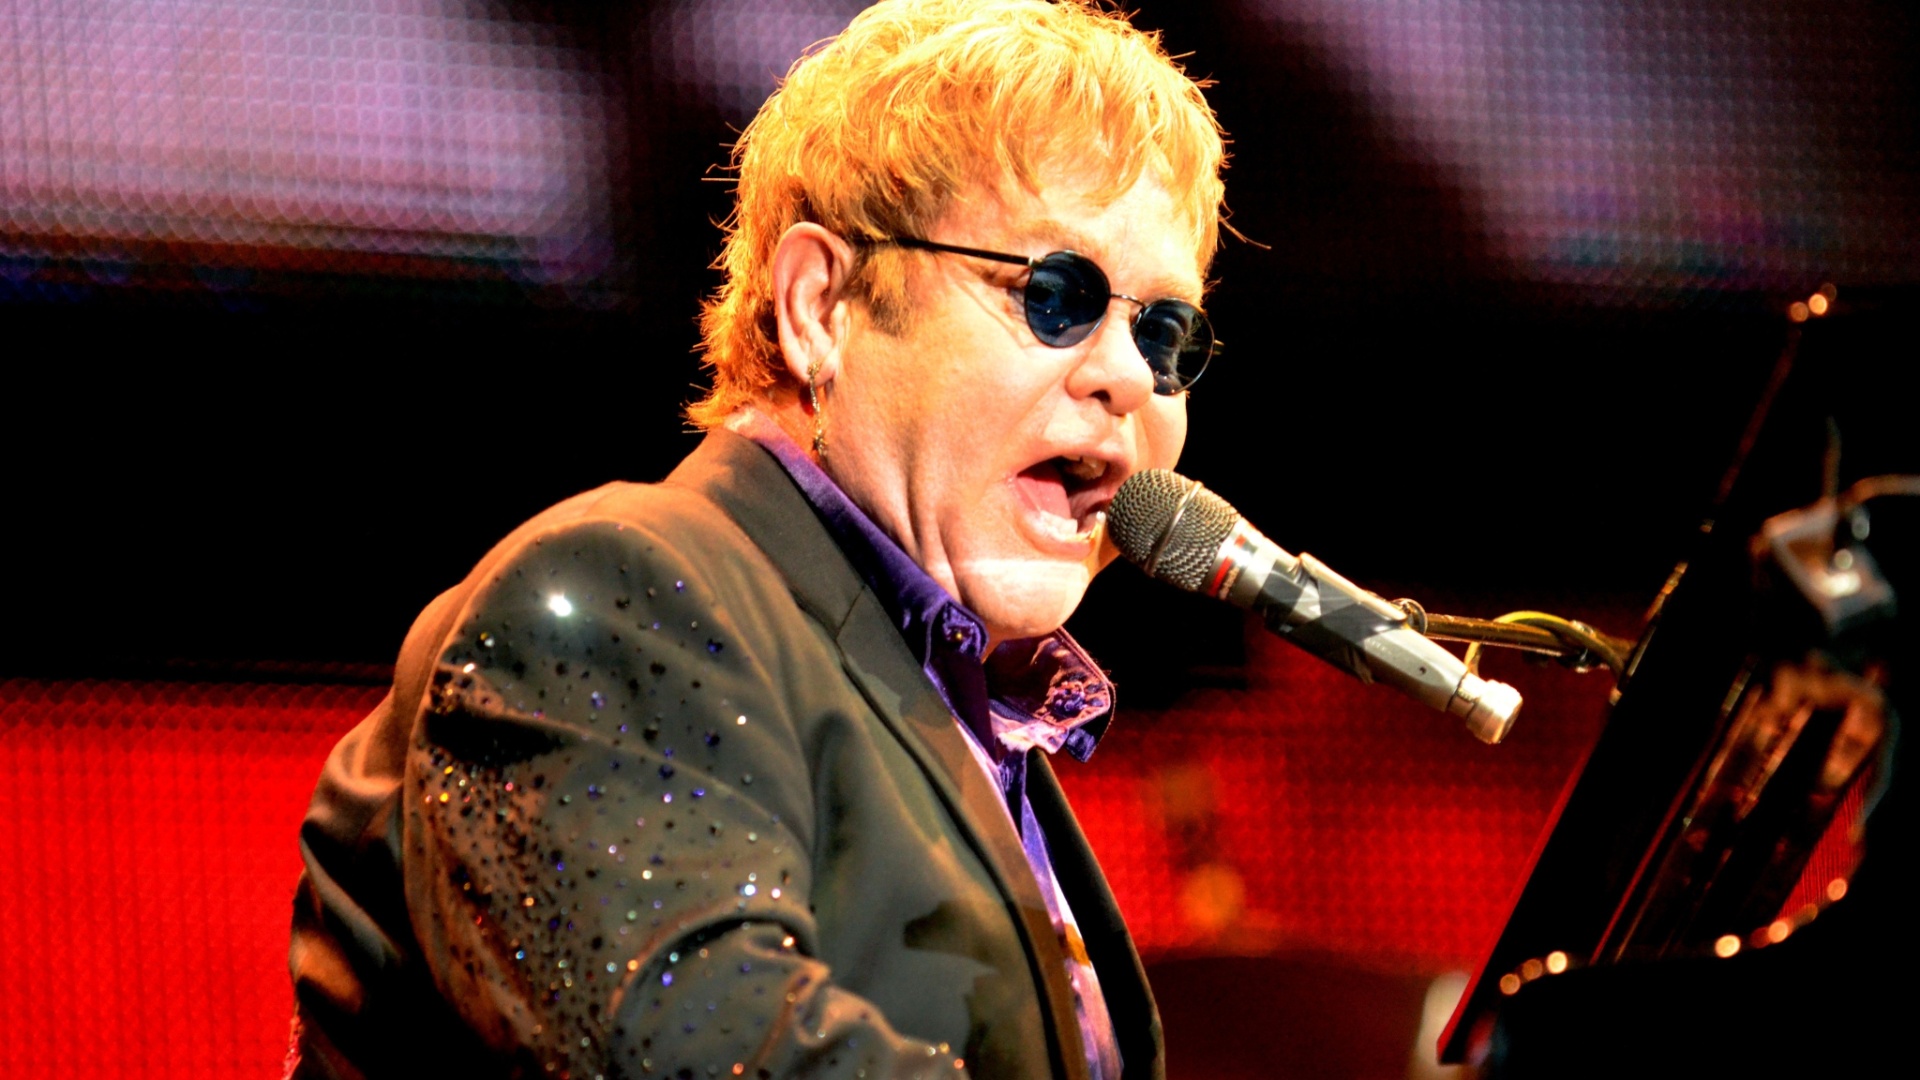 View And Download Elton John HD Wallpapers ...